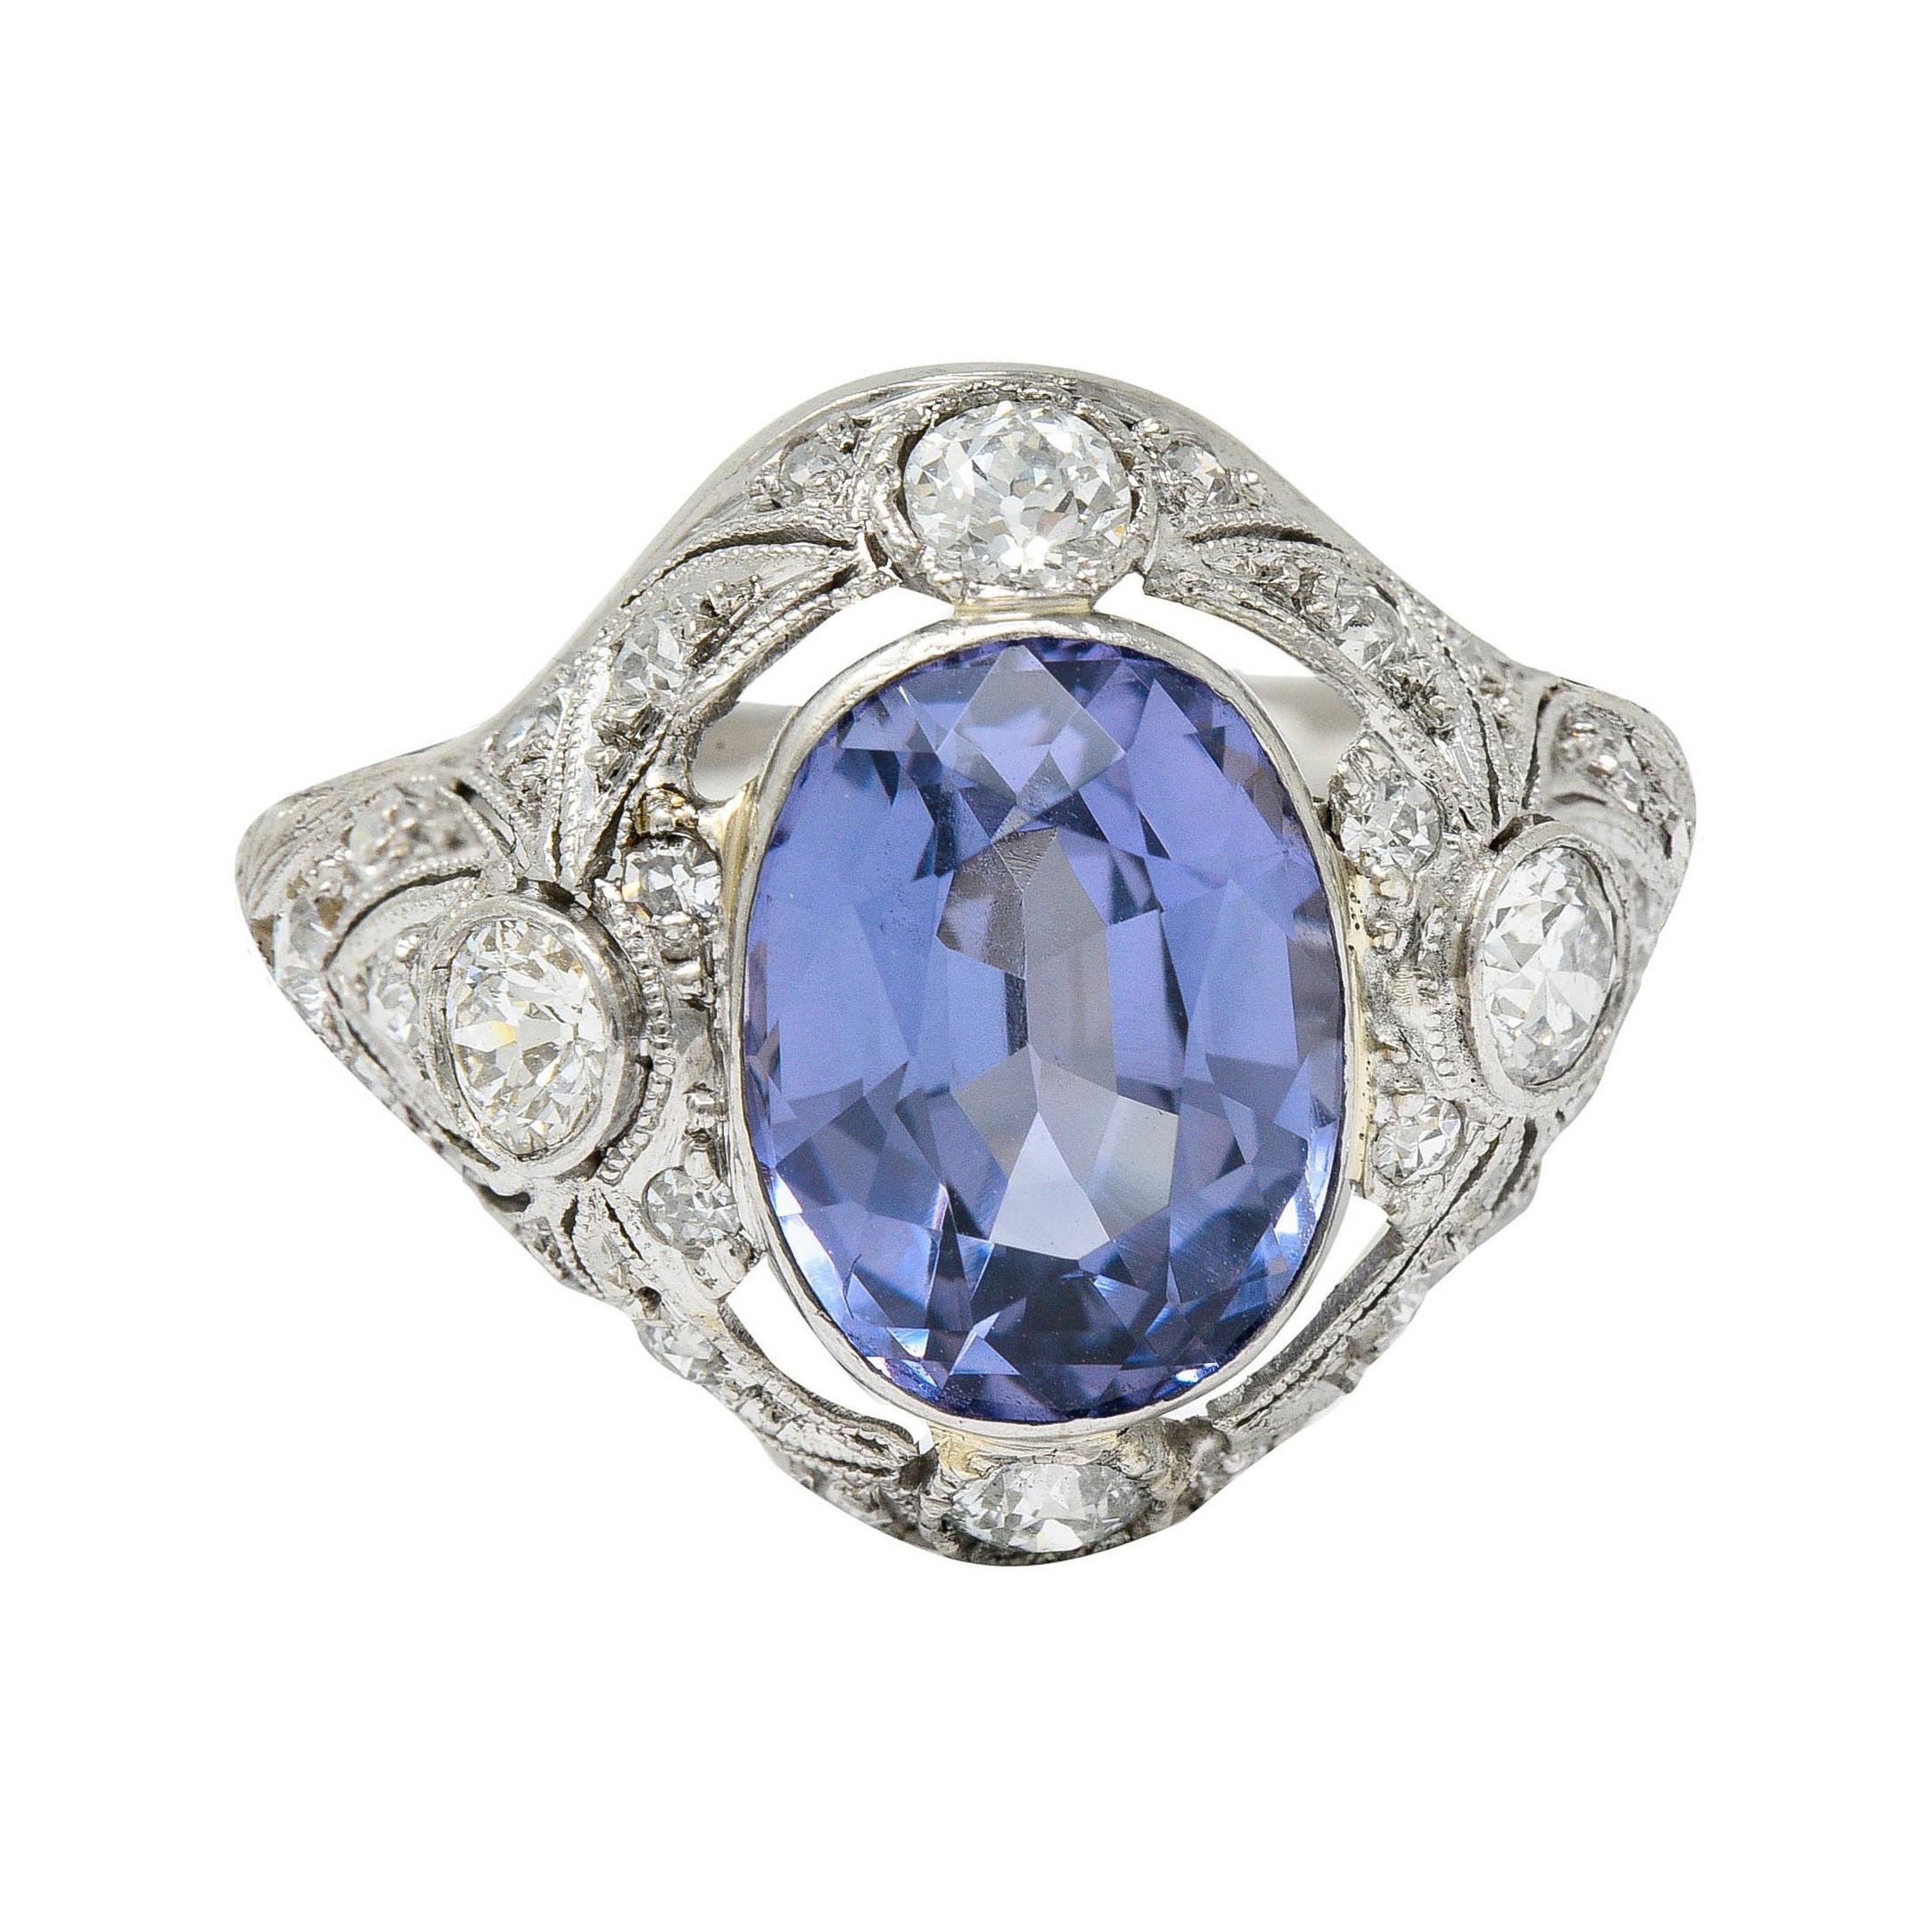 Edwardian 4.97 Carats No Heat Color-Changing Spinel Diamond Platinum Dinner Ring